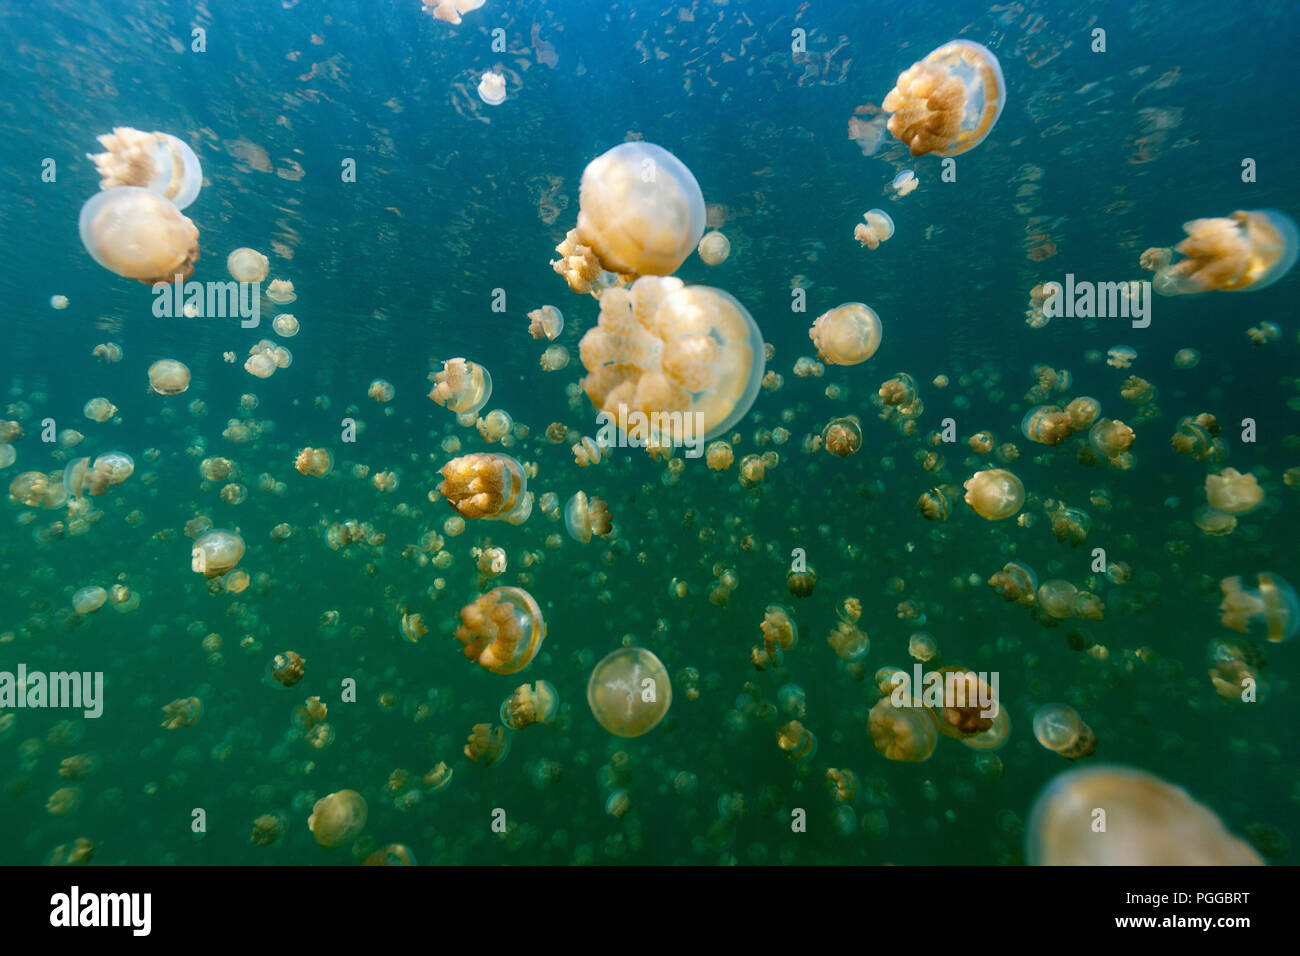 Underwater photo of endemic golden jellyfish in lake at Palau. Snorkeling in Jellyfish Lake is a popular activity for tourists to Palau. Stock Photo